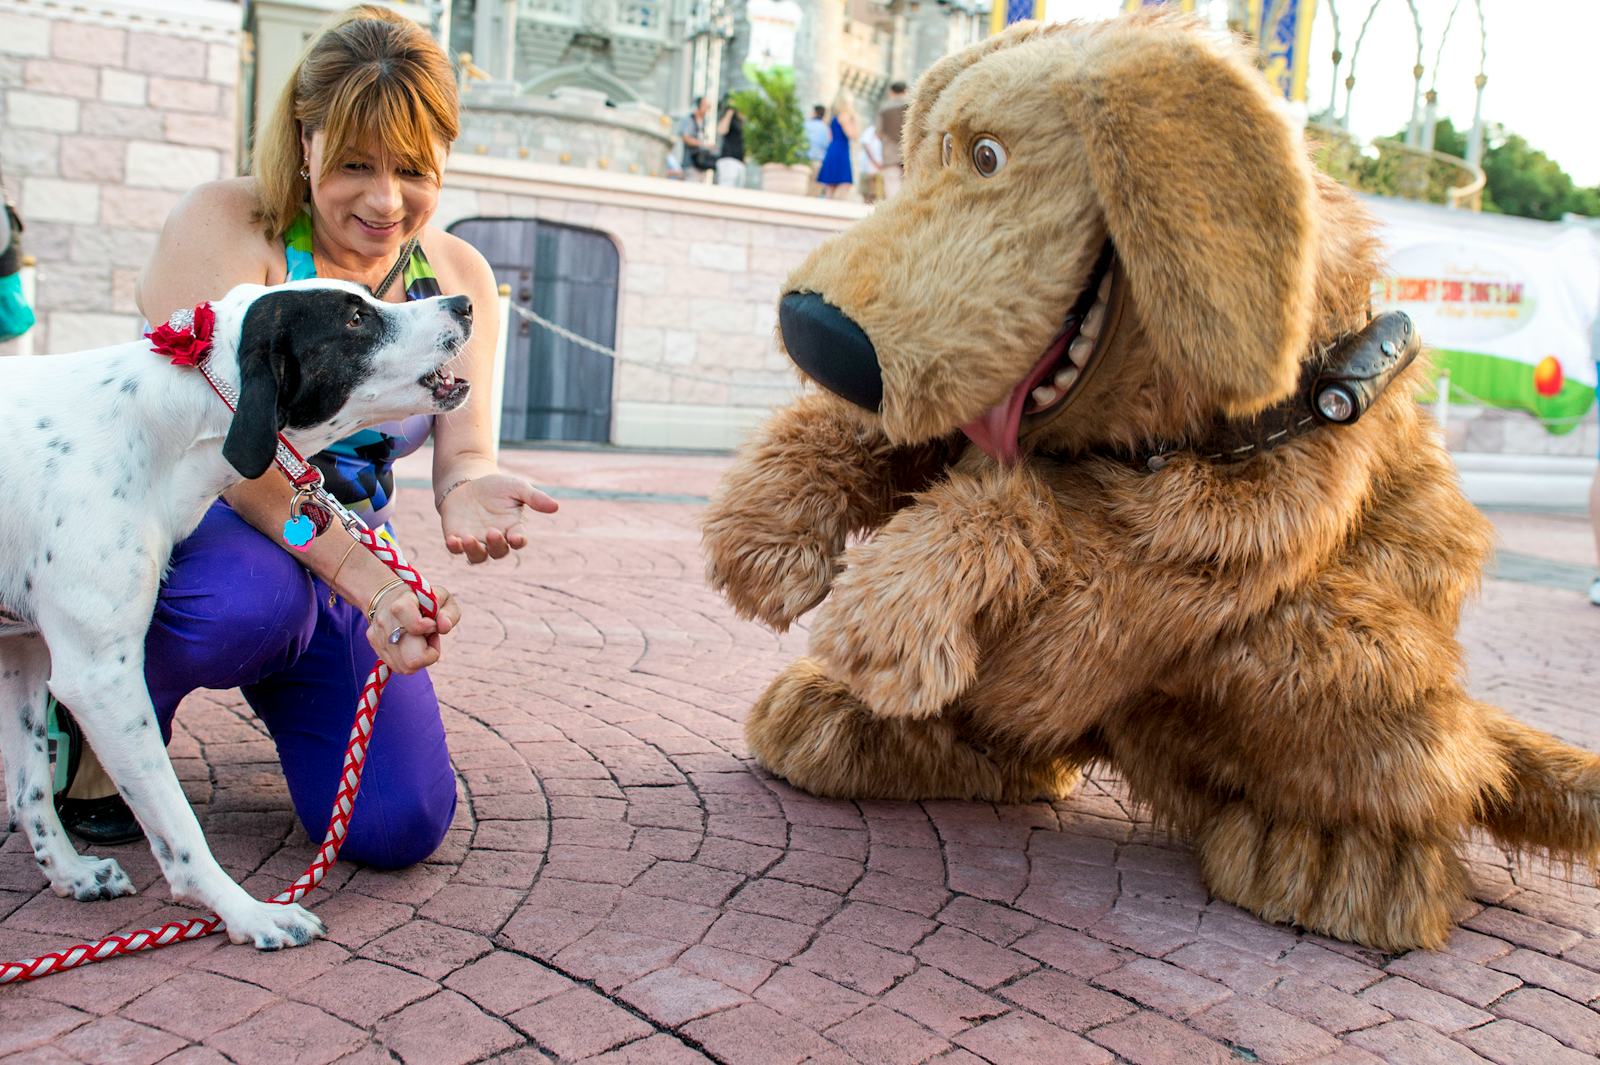 Can You Bring Your Dog To Disneyland? Here Are The Rules & Regulations